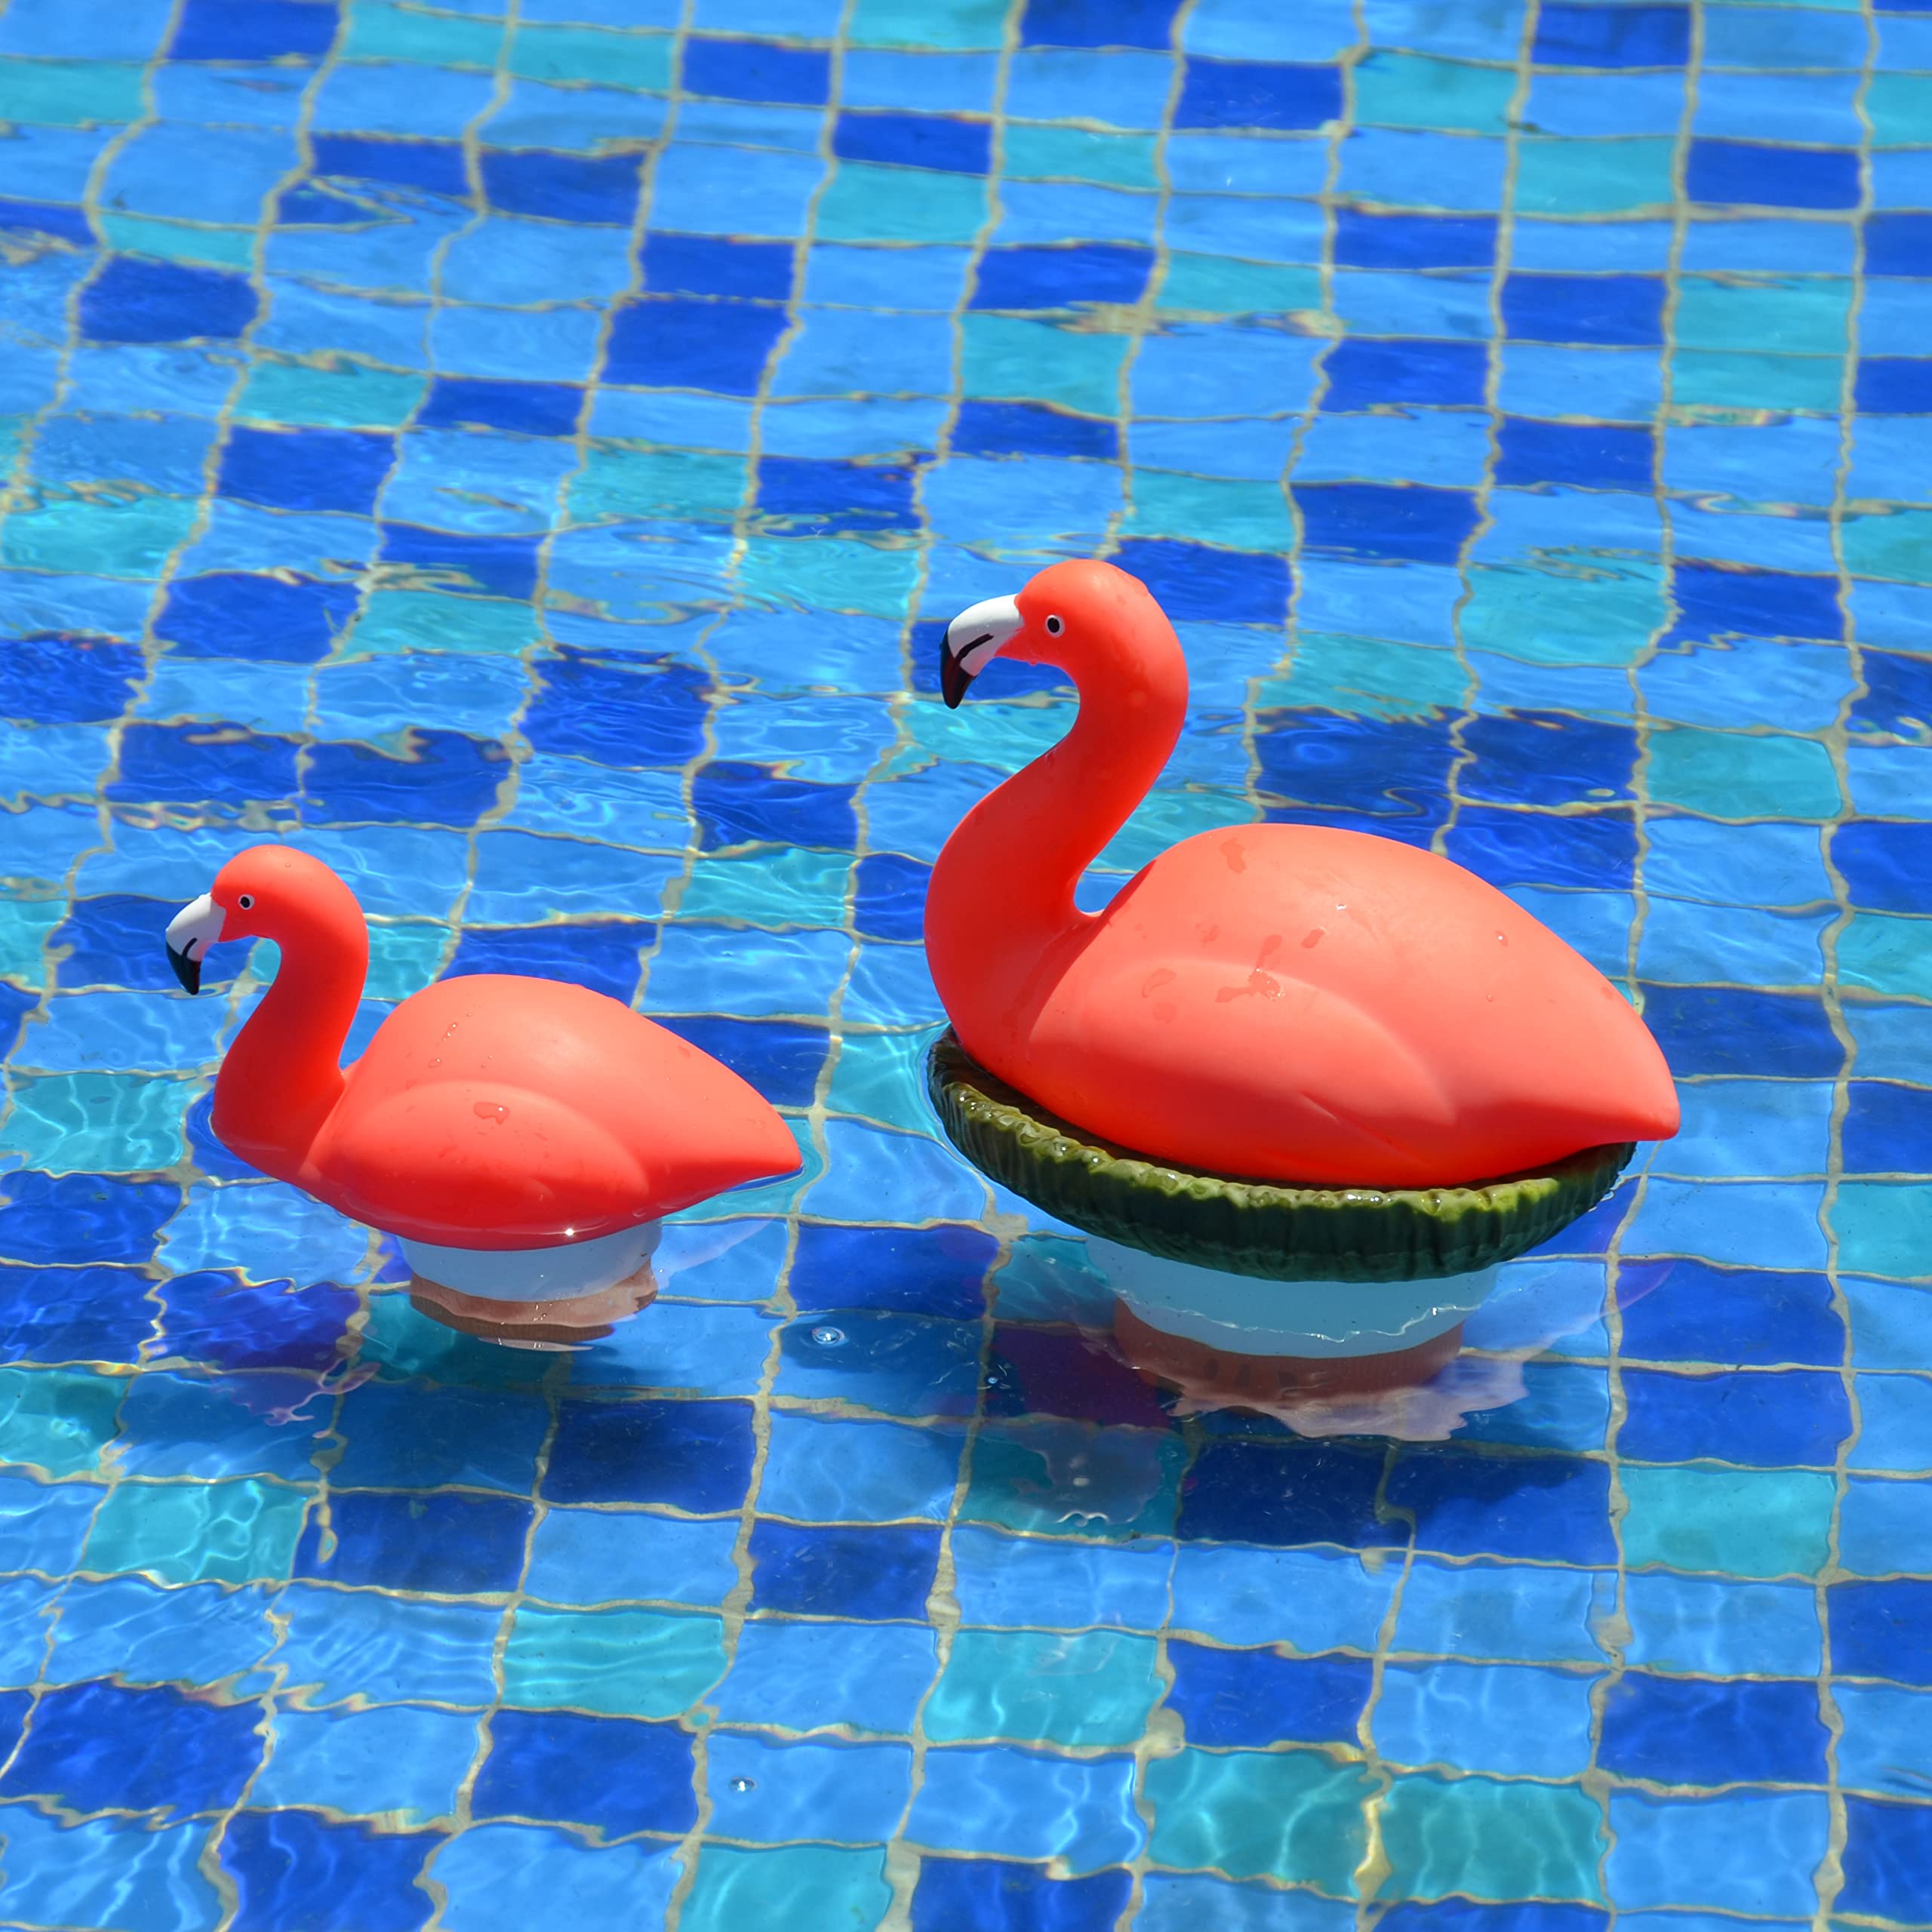 XY-WQ Flamingo Chlorine Floater for 1" Tab ONLY, Mini Floating Pool Chlorine Dispenser